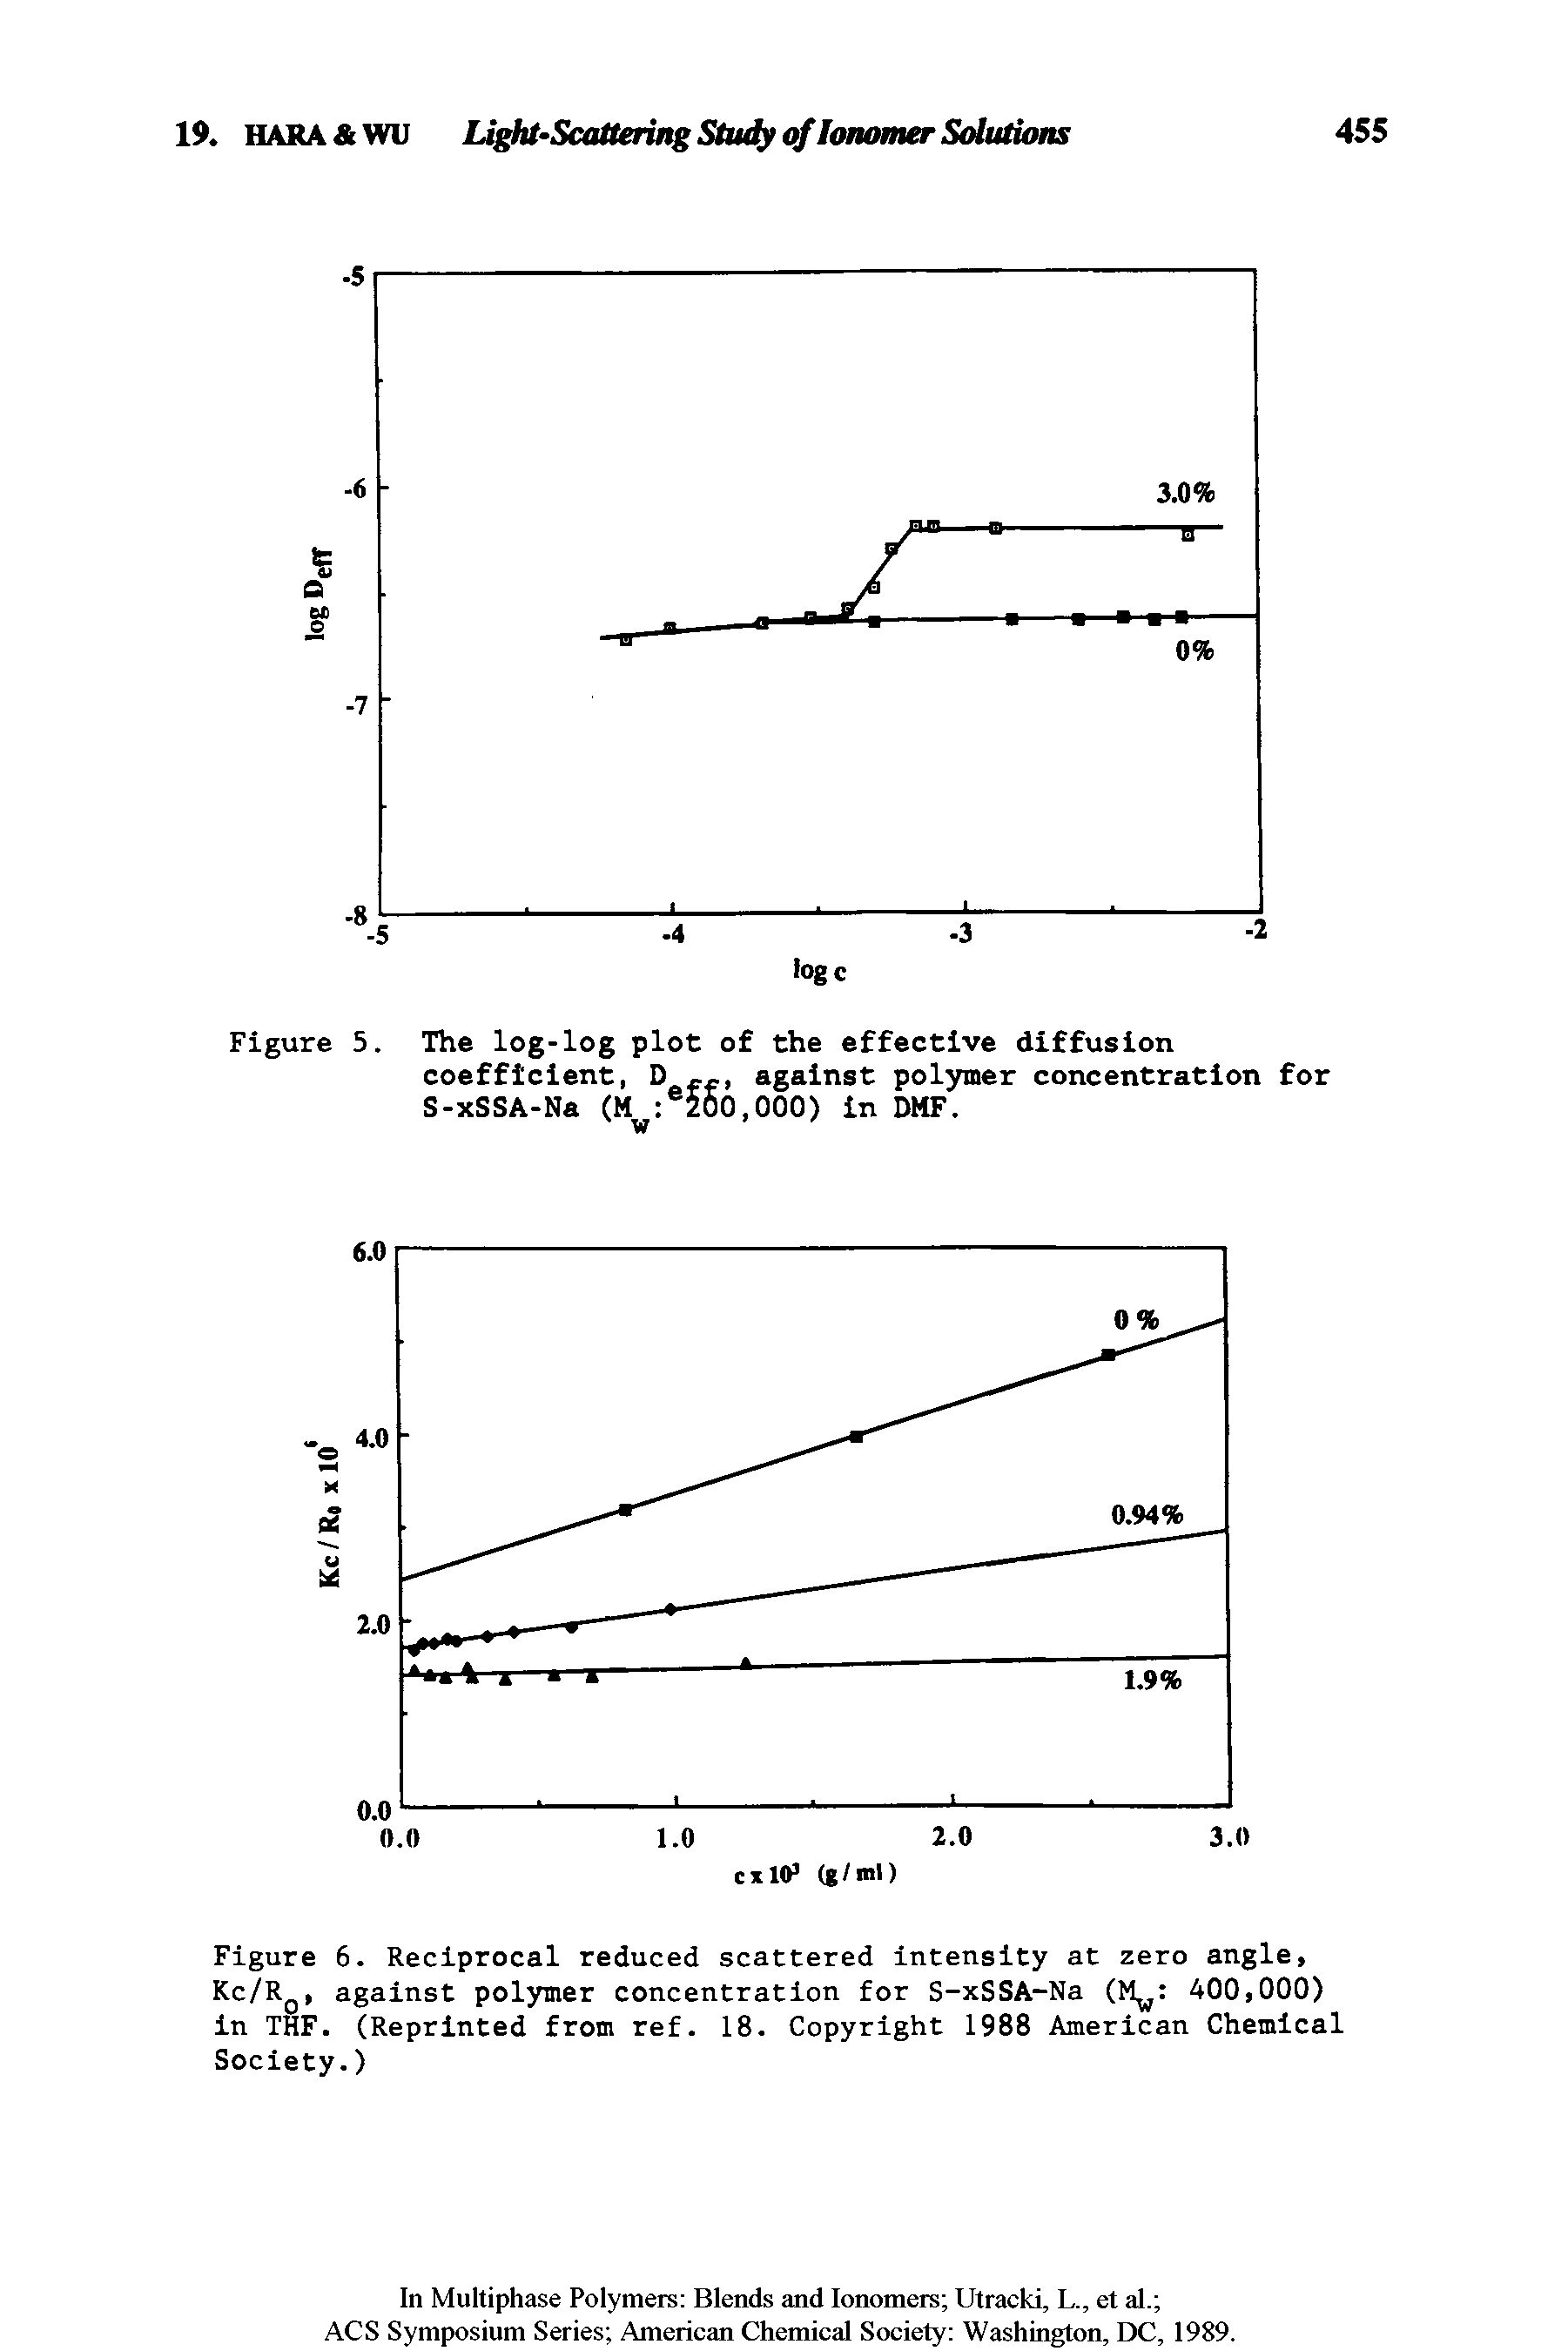 Figure 6. Reciprocal reduced scattered intensity at zero angle, Kc/Rg, against polymer concentration for S-xSSA-Na (M 400,000) in THF. (Reprinted from ref. 18. Copyright 1988 American Chemical Society.)...